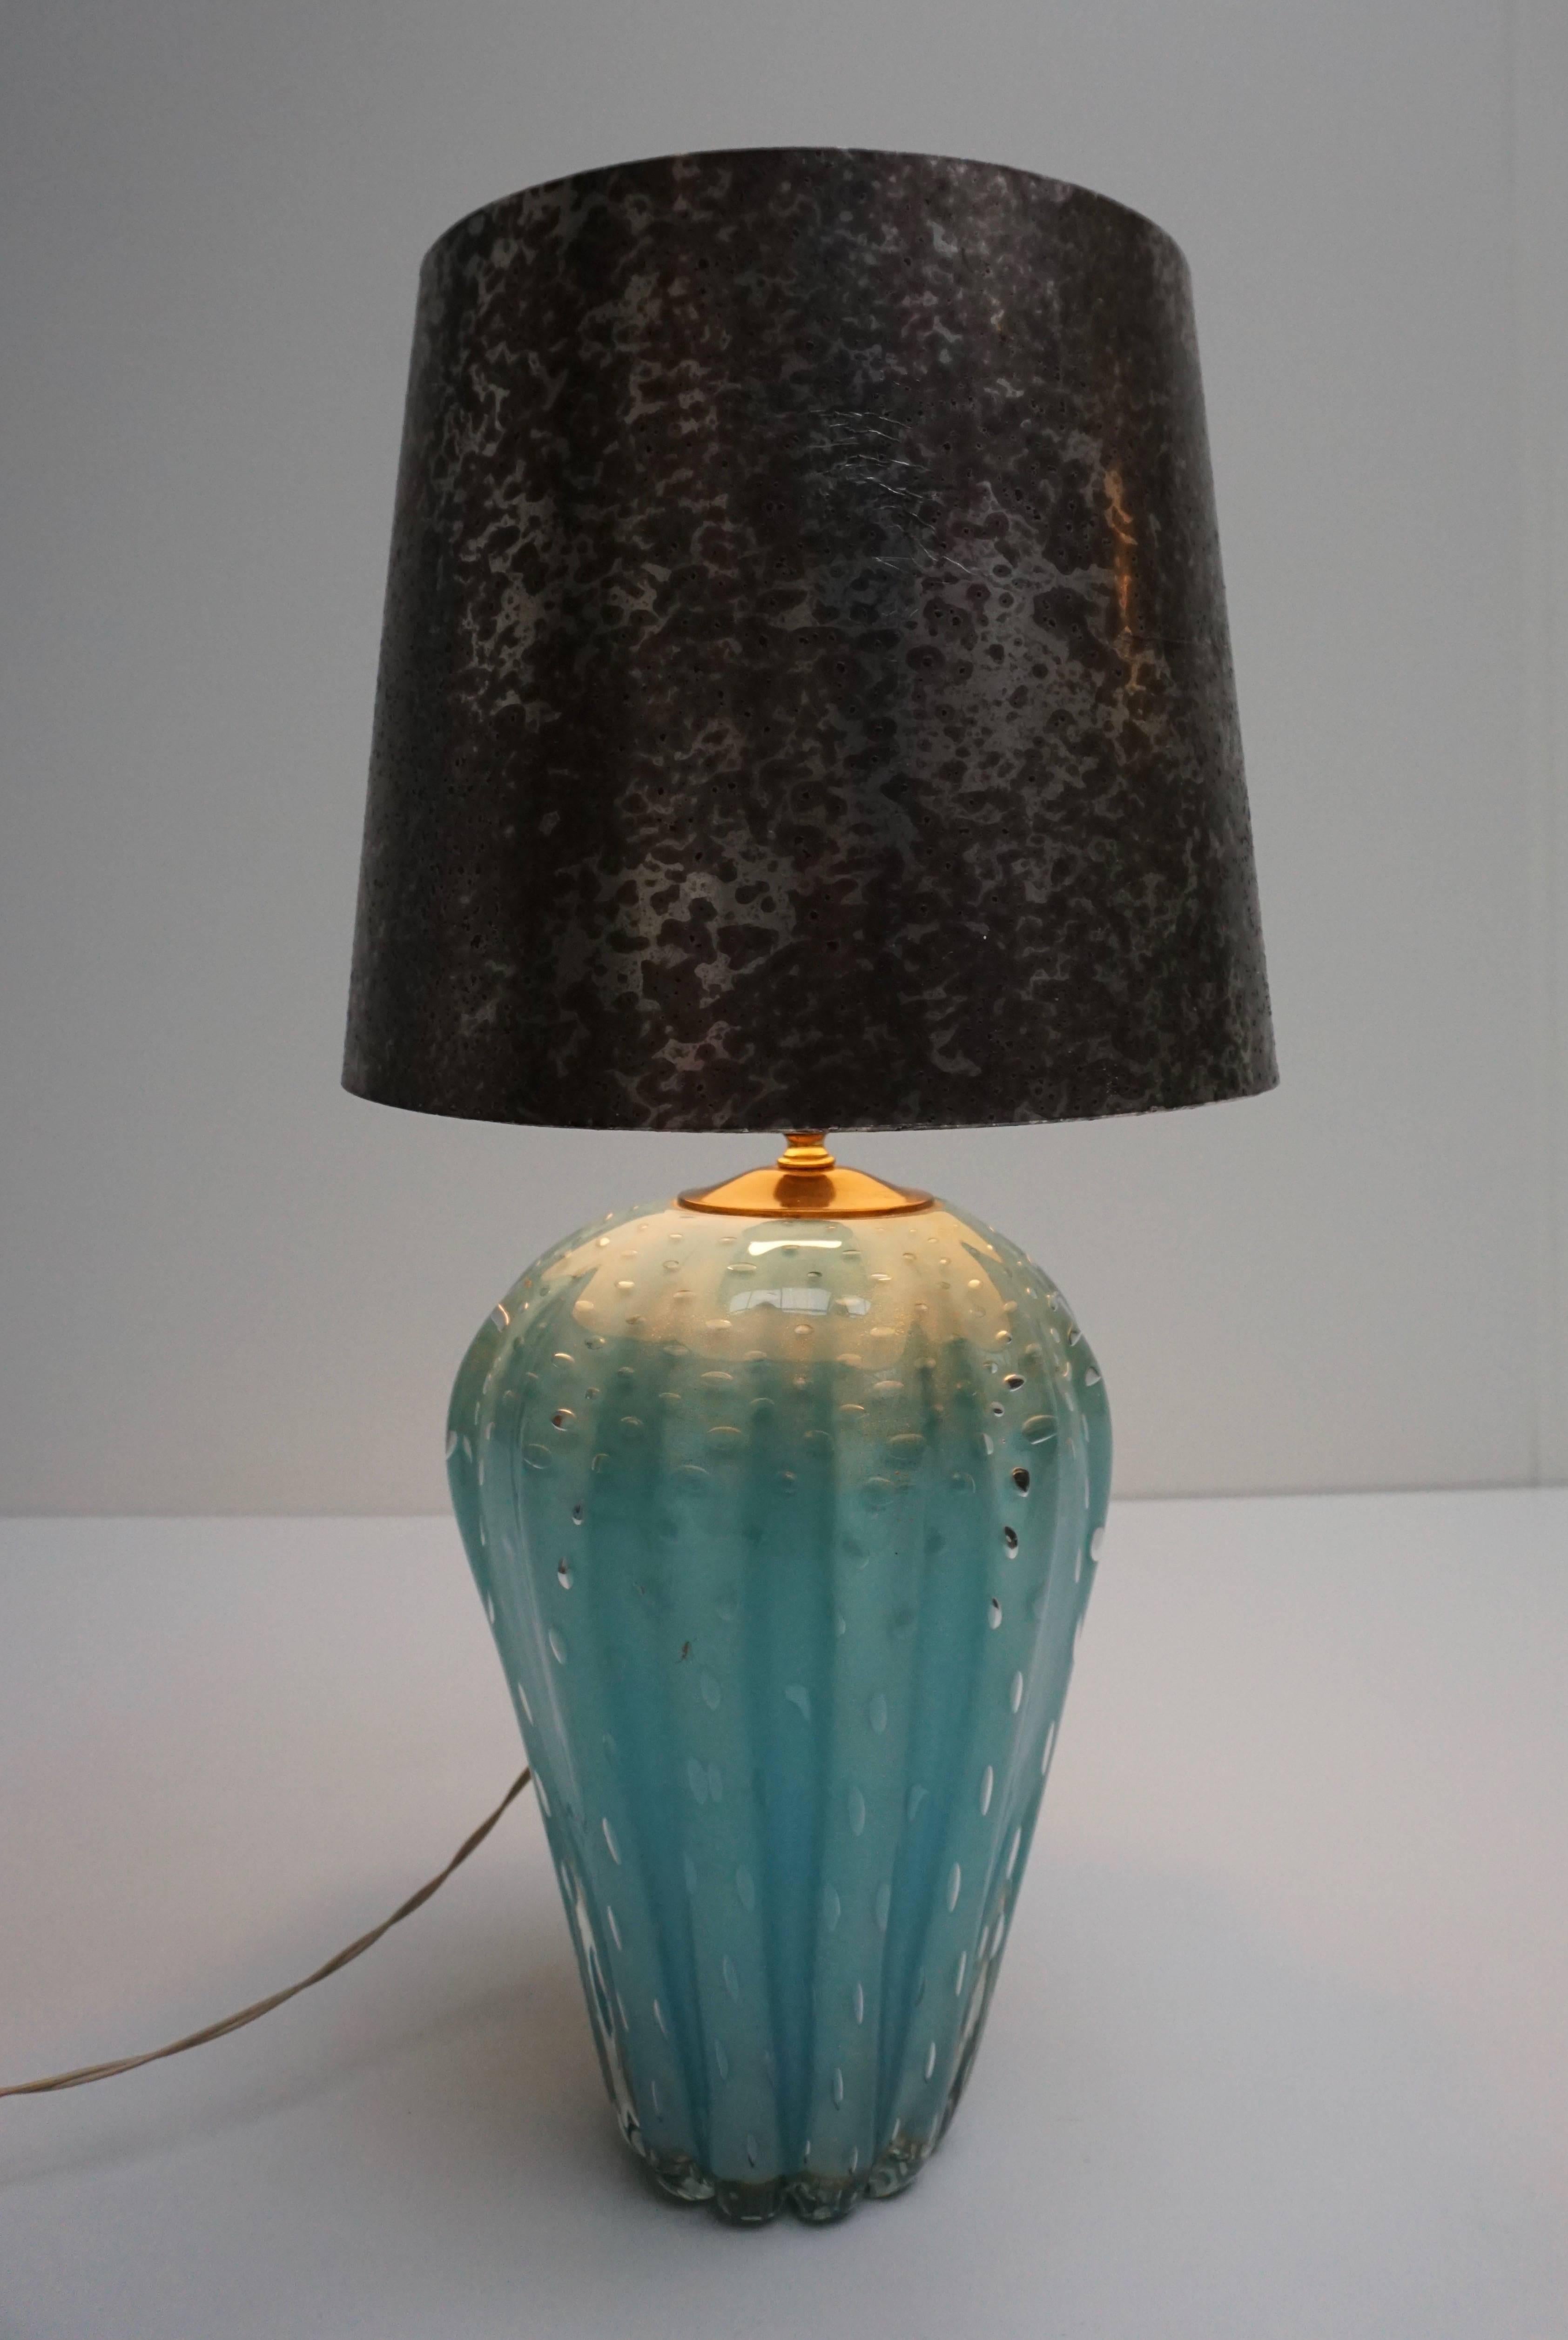 Italian Murano glass table lamp.
The lampshade is not included in the price.
Diameter glass base is 22 cm.
Diameter shade is 30 cm.
Height glass base is 32 cm.
Height glass base with fitting is 40 cm.
Total height with the shade is 61 cm.
